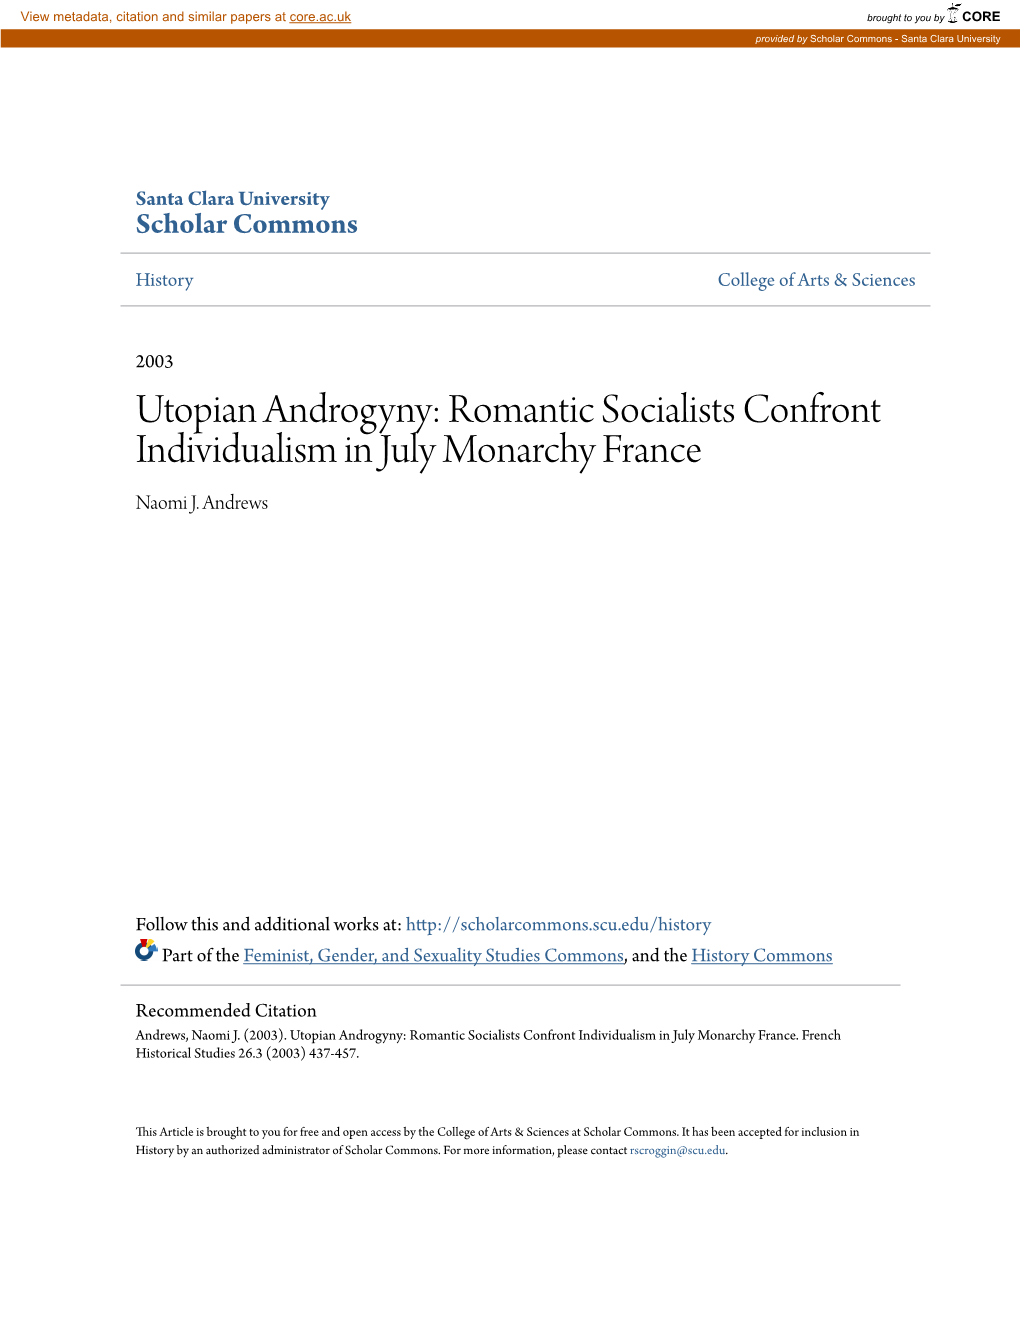 Utopian Androgyny: Romantic Socialists Confront Individualism in July Monarchy France Naomi J